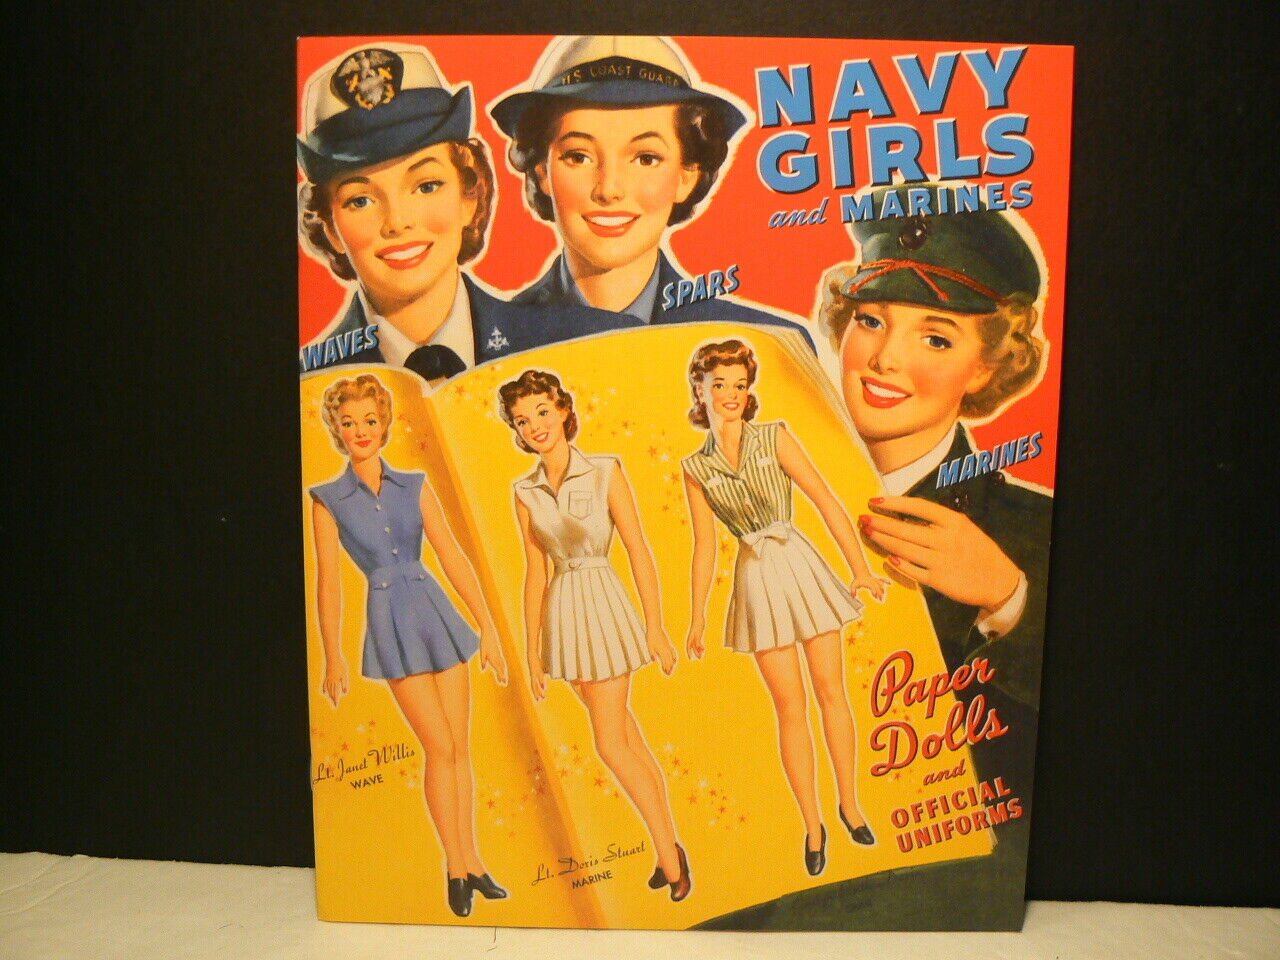 Paper Dolls Reproduction, “navy Girls And Marines”, 2018, Paper Studio Press